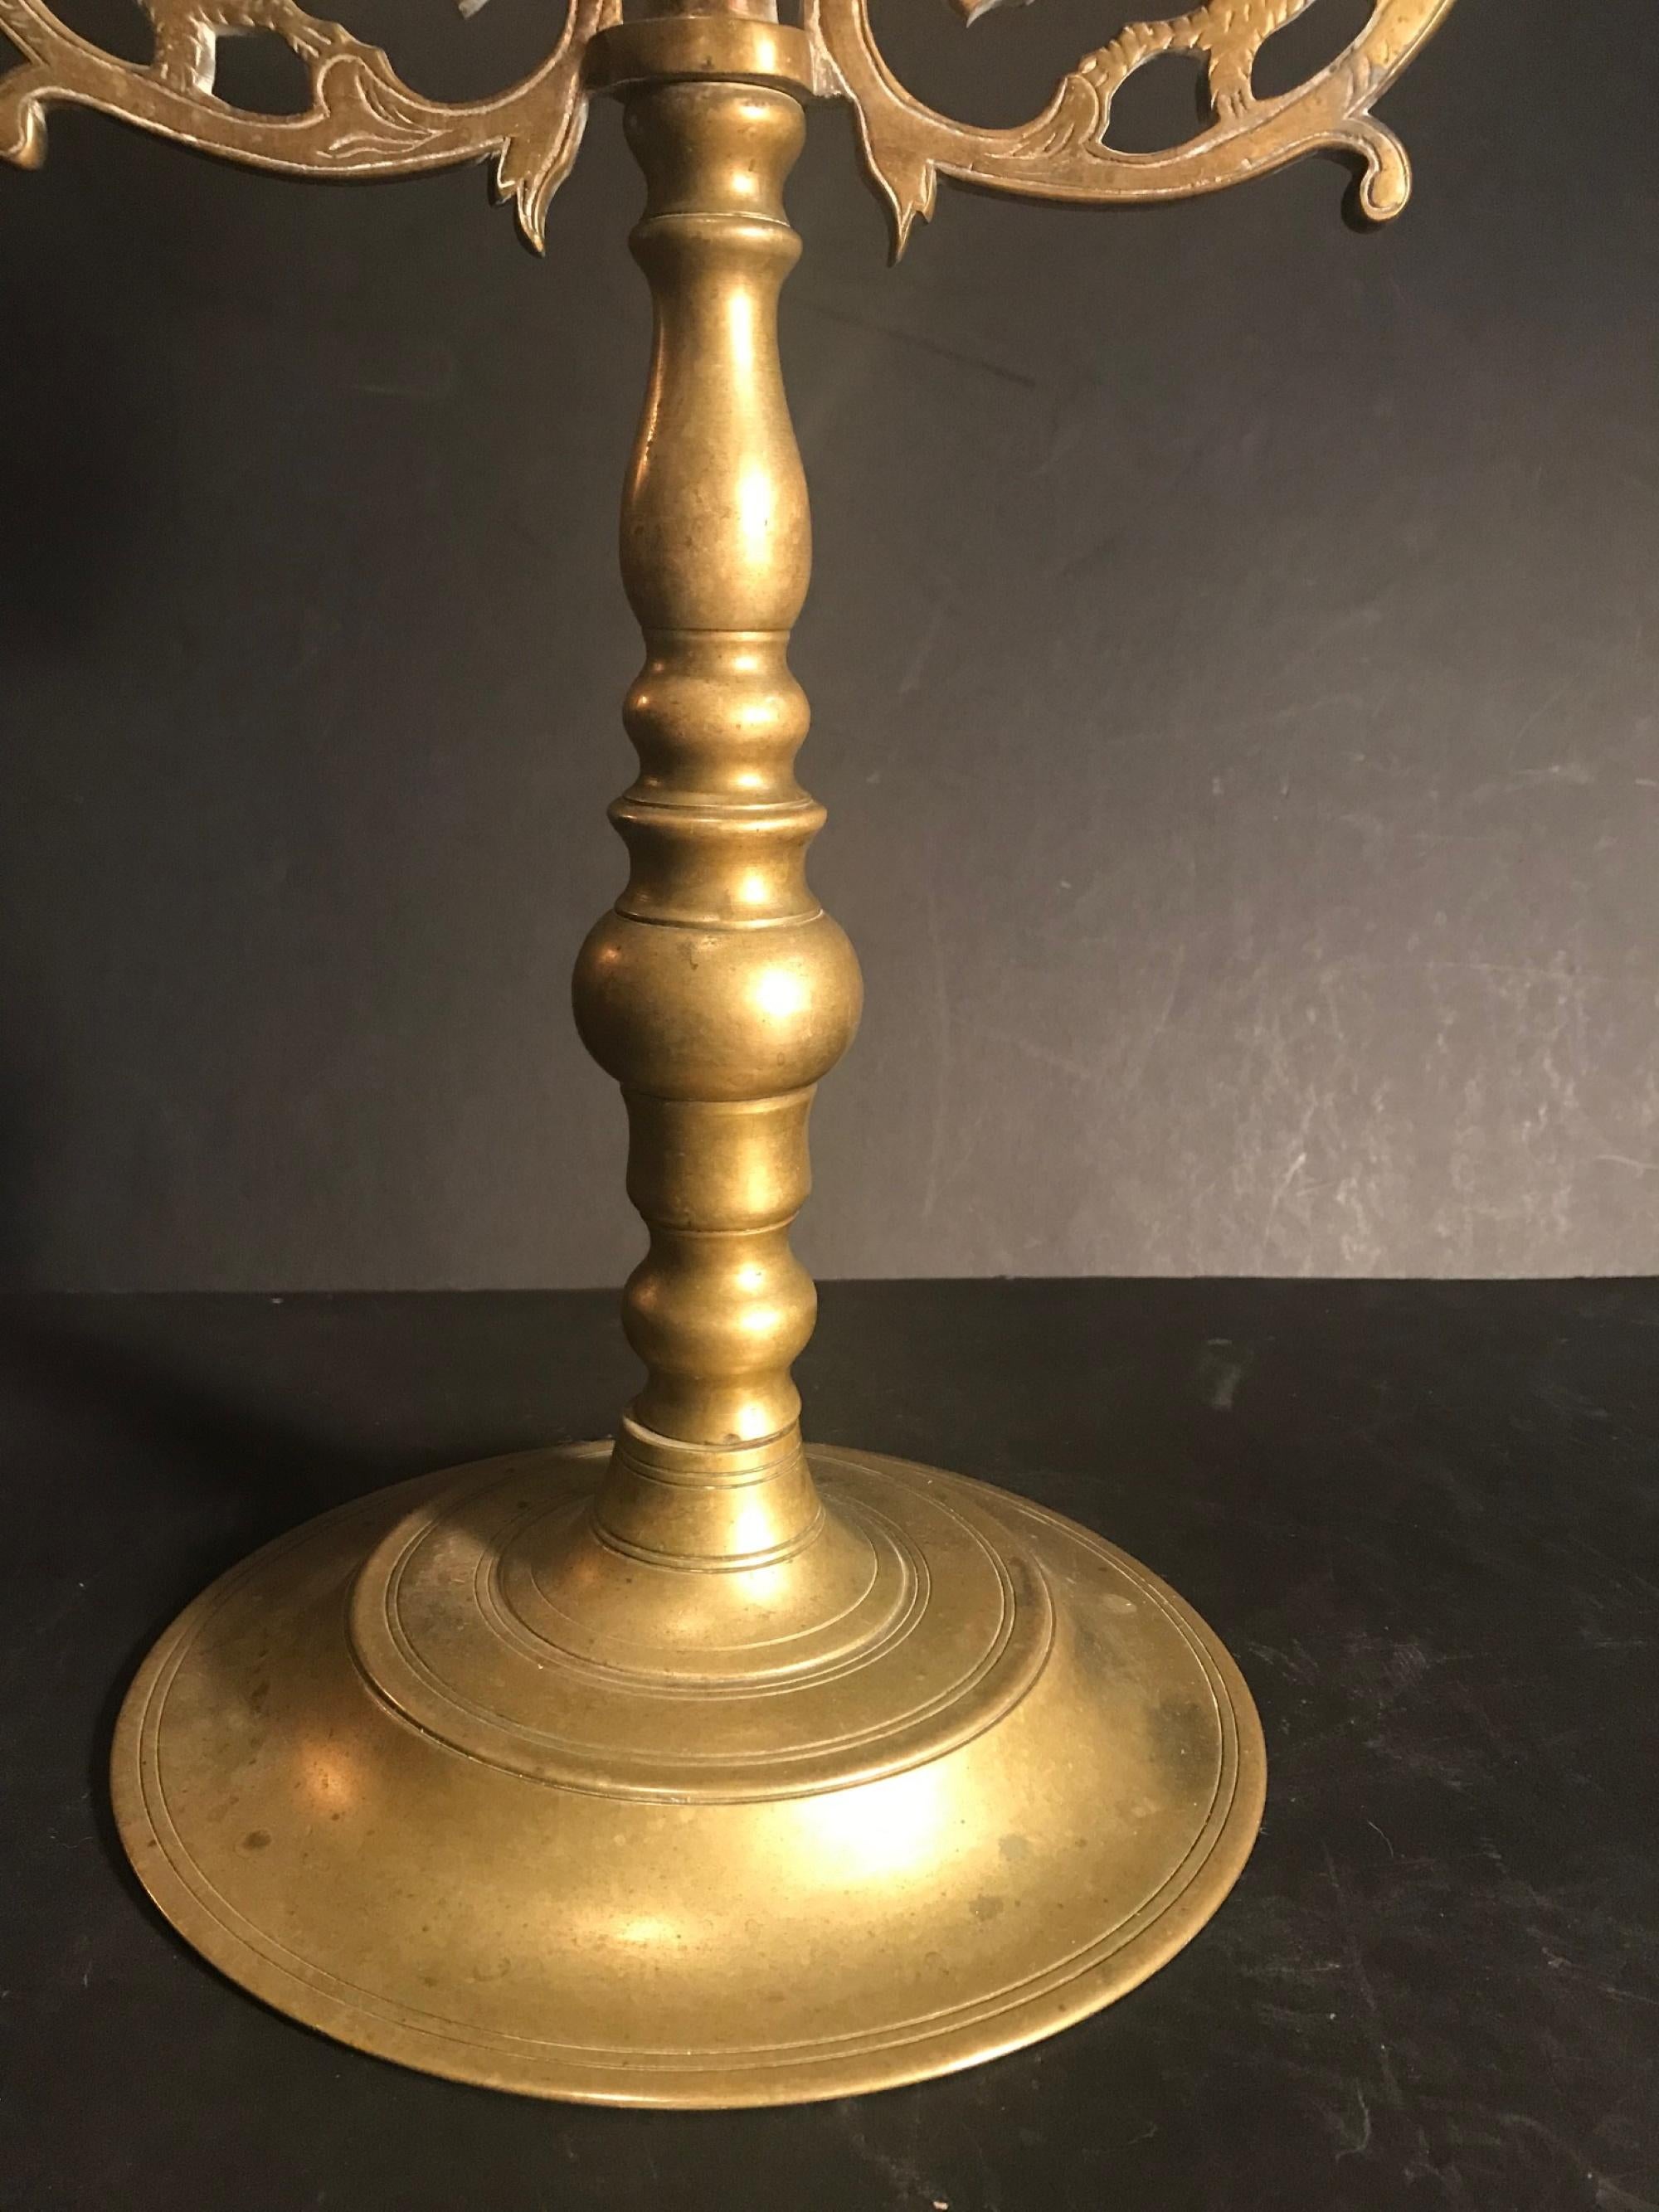 This glorious brass four candle candelabra is set on a heavy round base with a turned stem. The upper portion is decorated with lions facing each other. Engraved details outline and embellish the lion figures. Centered at the top is a finial of the